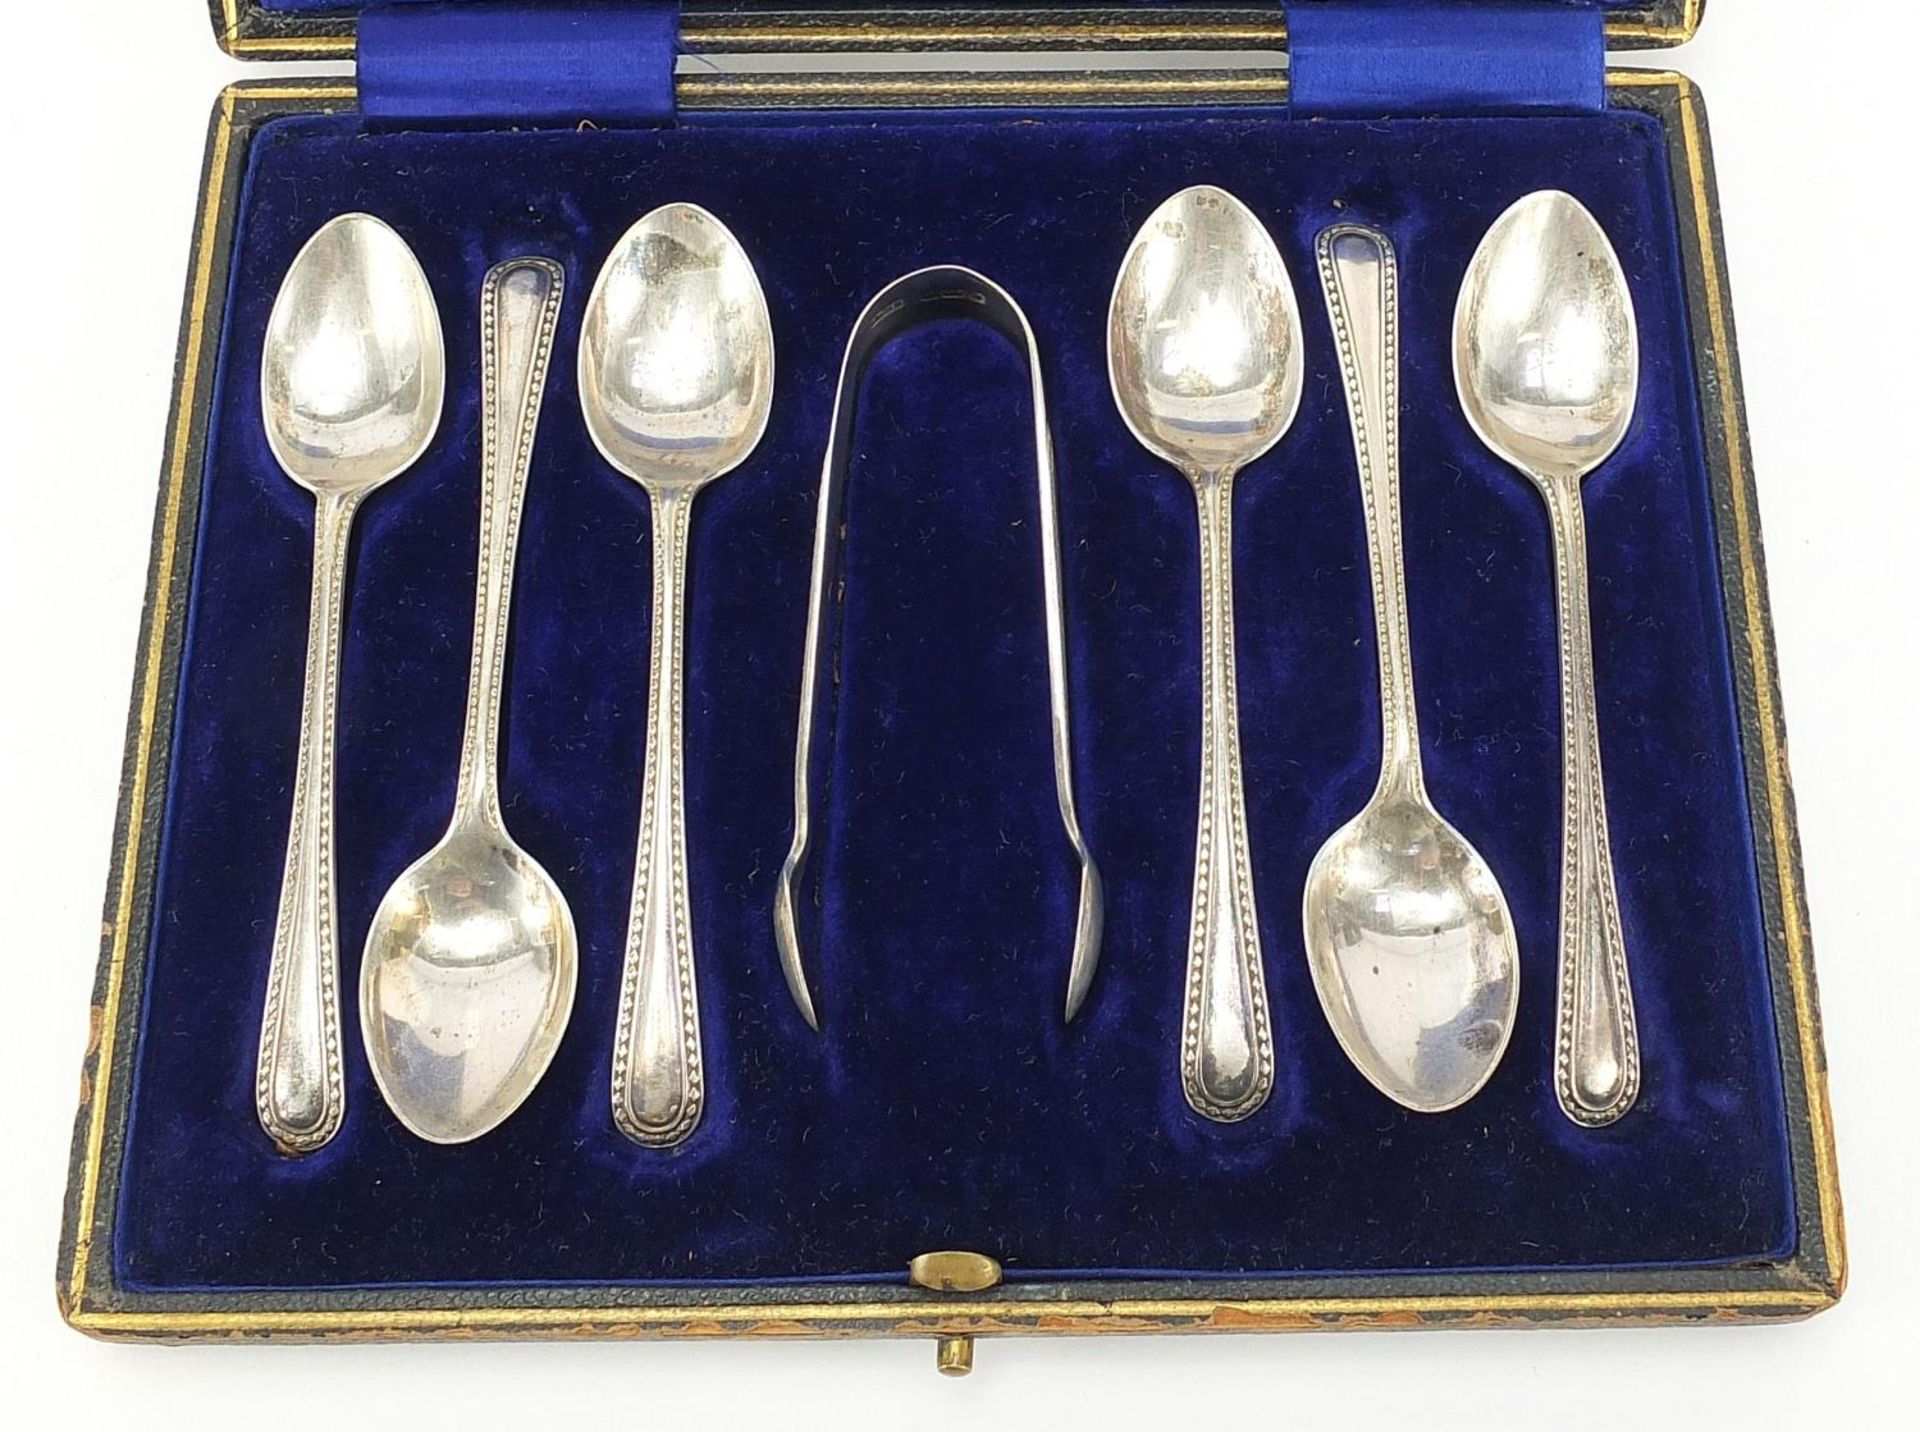 Henry Williamson Ltd, set of six Edwardian silver teaspoons and sugar tongs housed in a fitted case, - Image 2 of 6